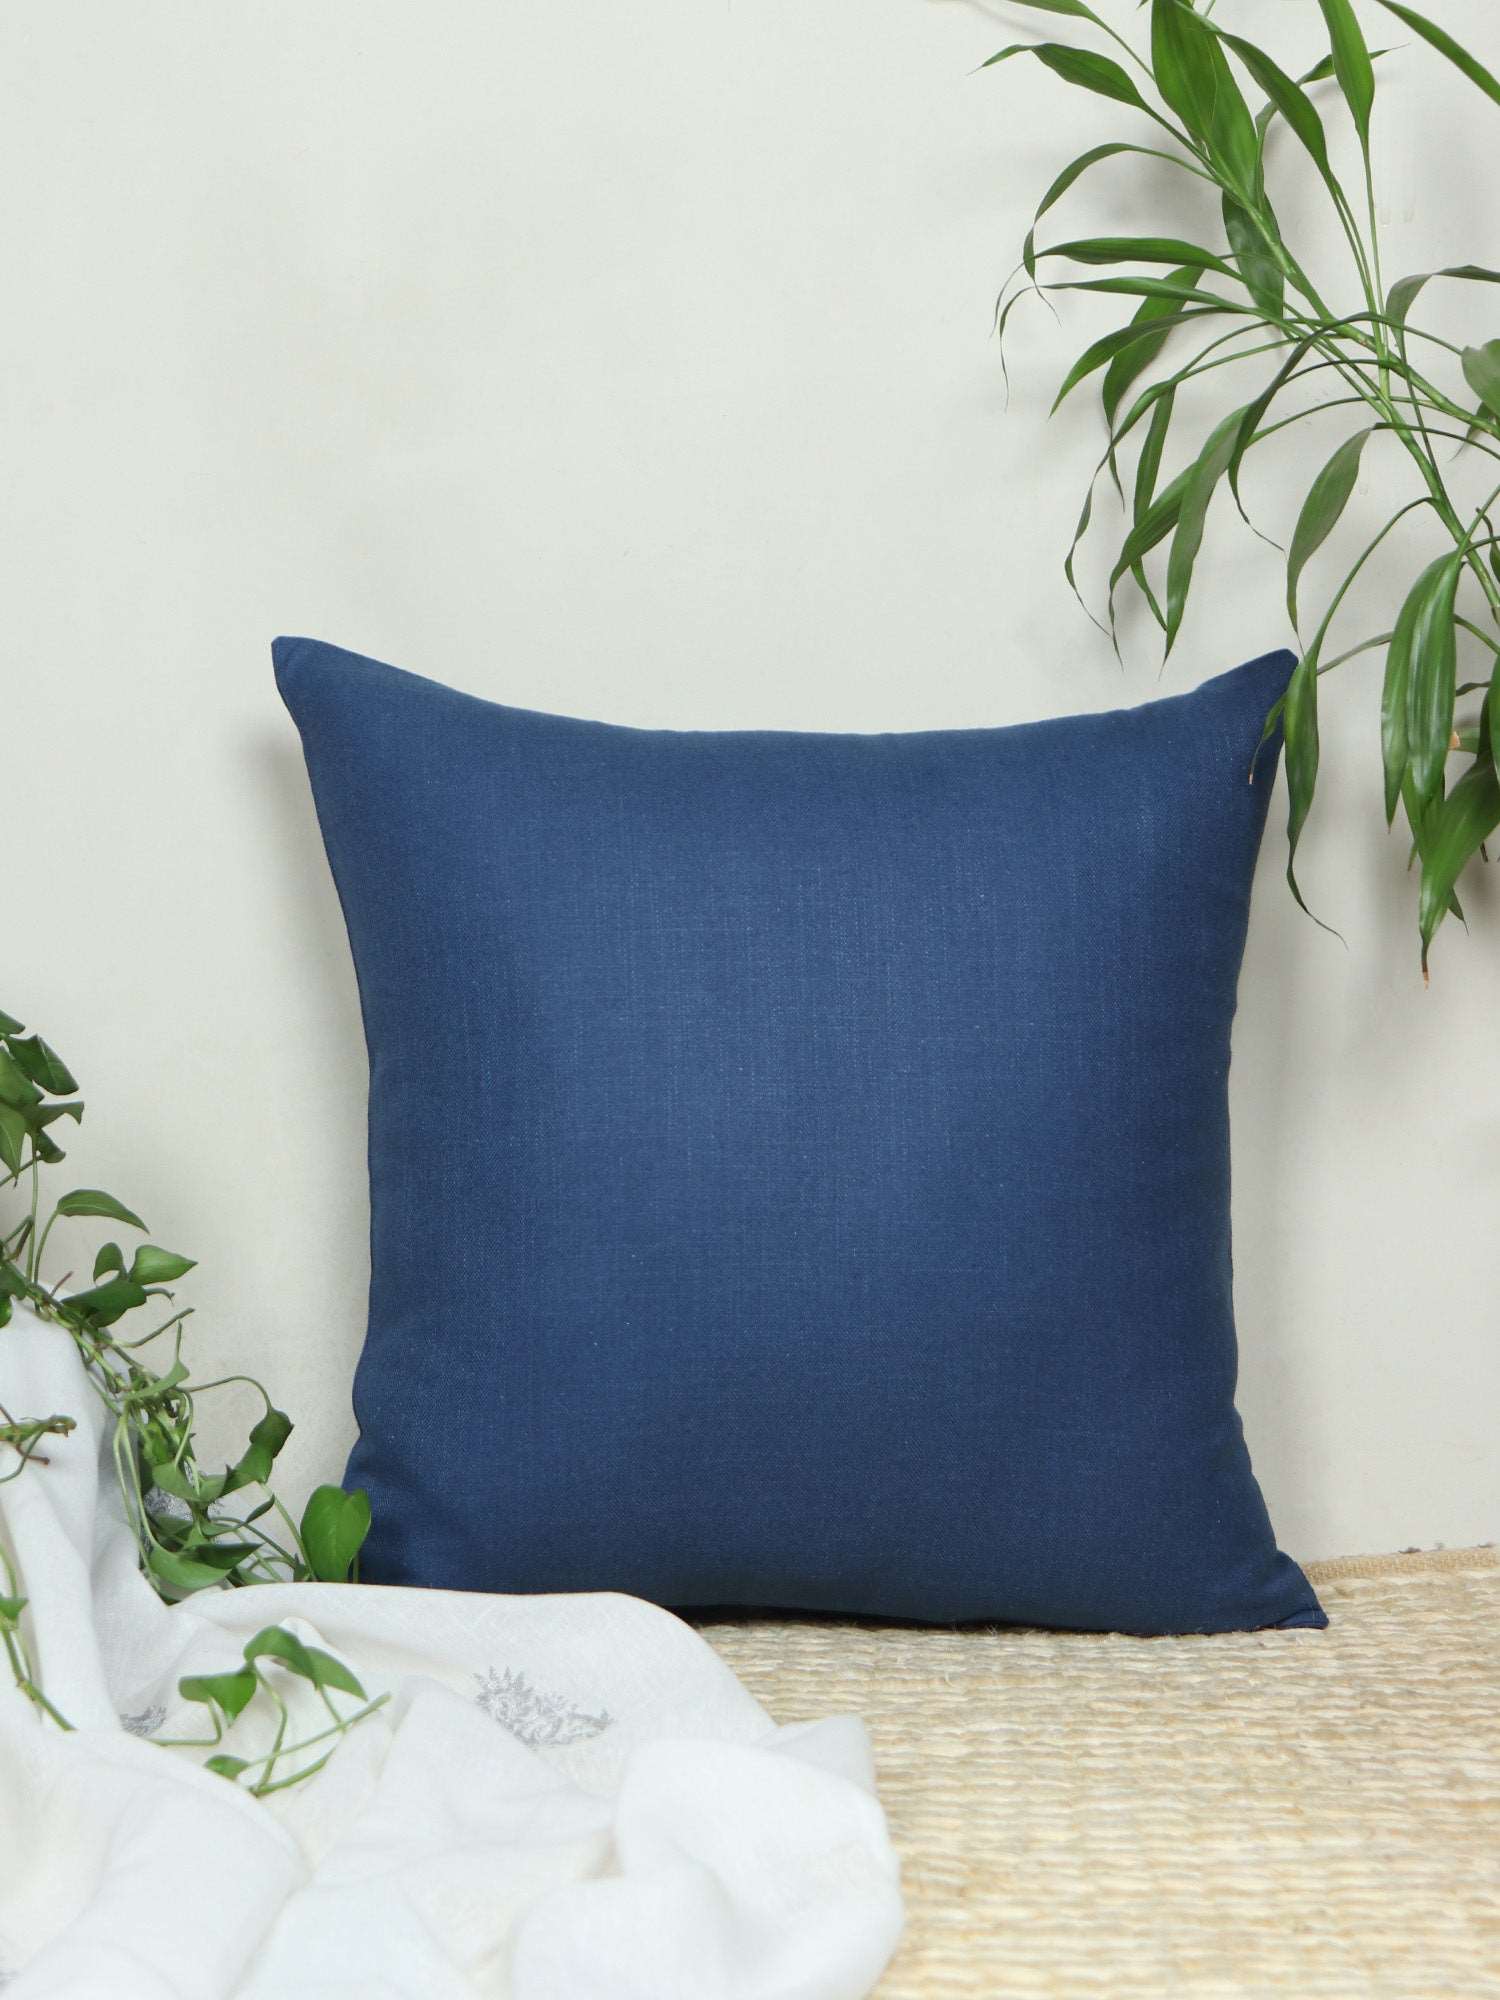 Cushion Cover (Euroshams) for Sofa, Bed Cotton Blend | Self Textured | Navy Blue - 24x24in(61x61cm) (Pack of 1)